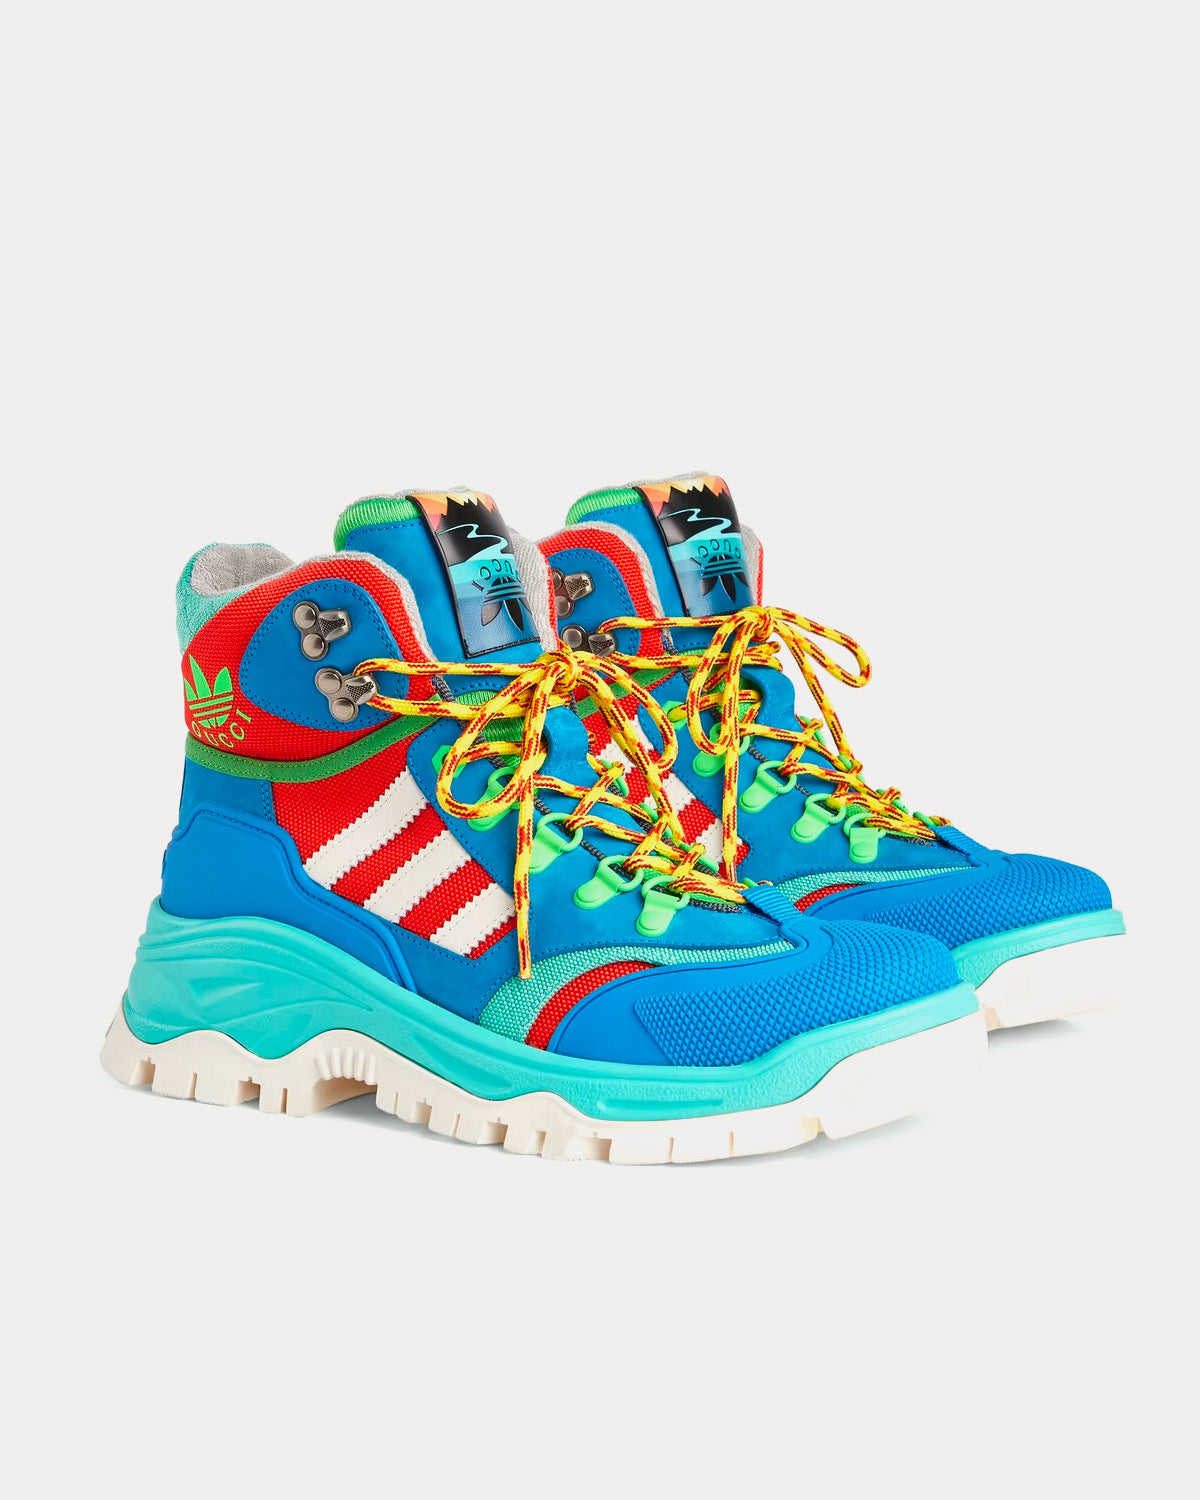 Adidas x Gucci - Lace-Up Technical Canvas Light Green / Blue / Red High Top Sneakers